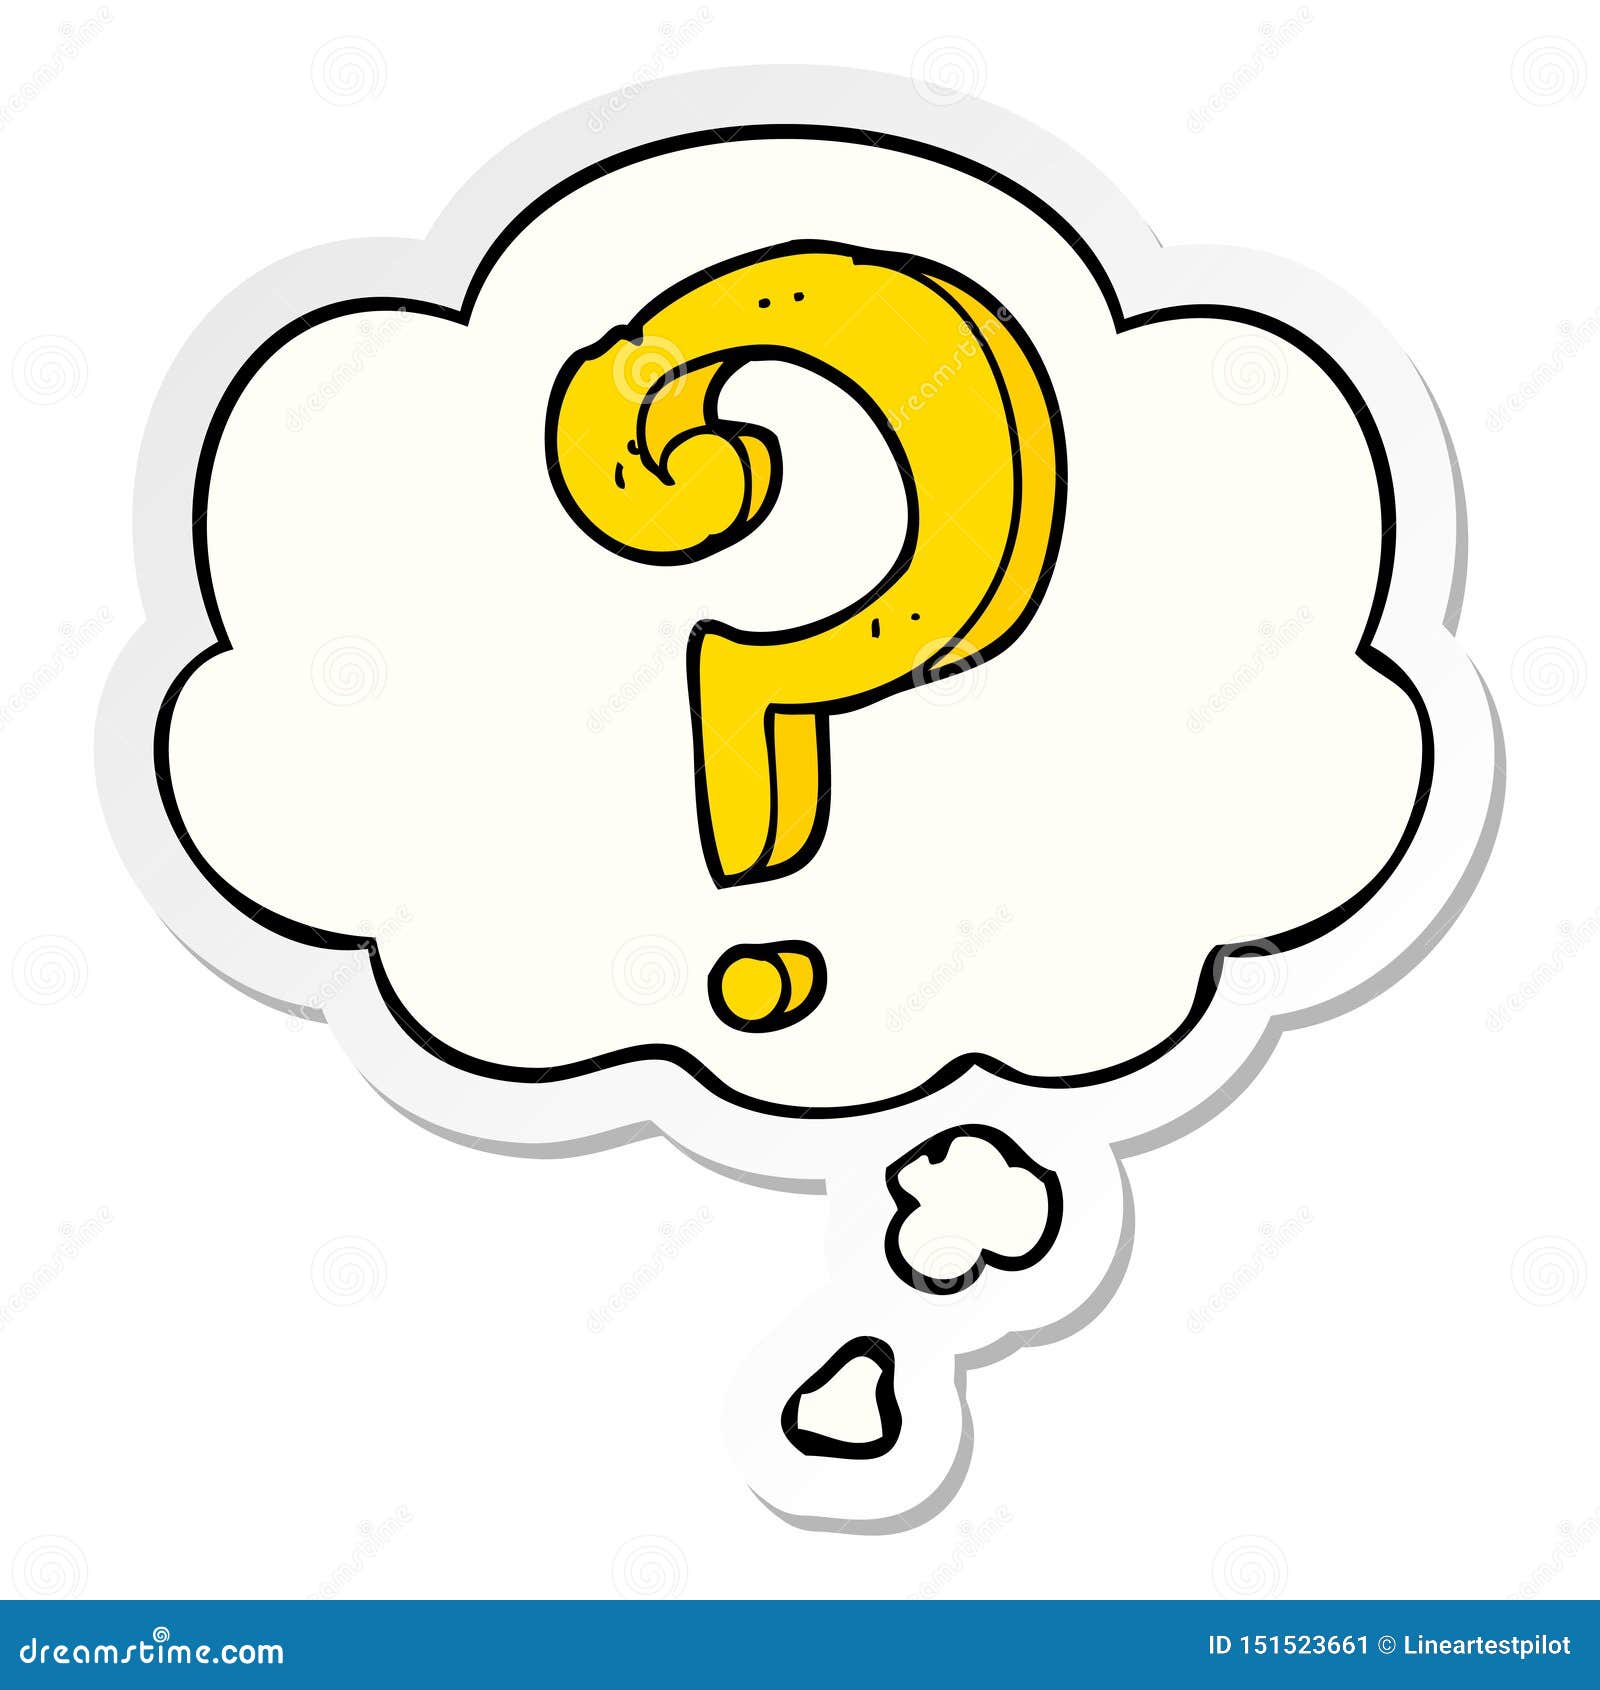 A Creative Cartoon Question Mark And Thought Bubble As A Printed Sticker Stock Vector